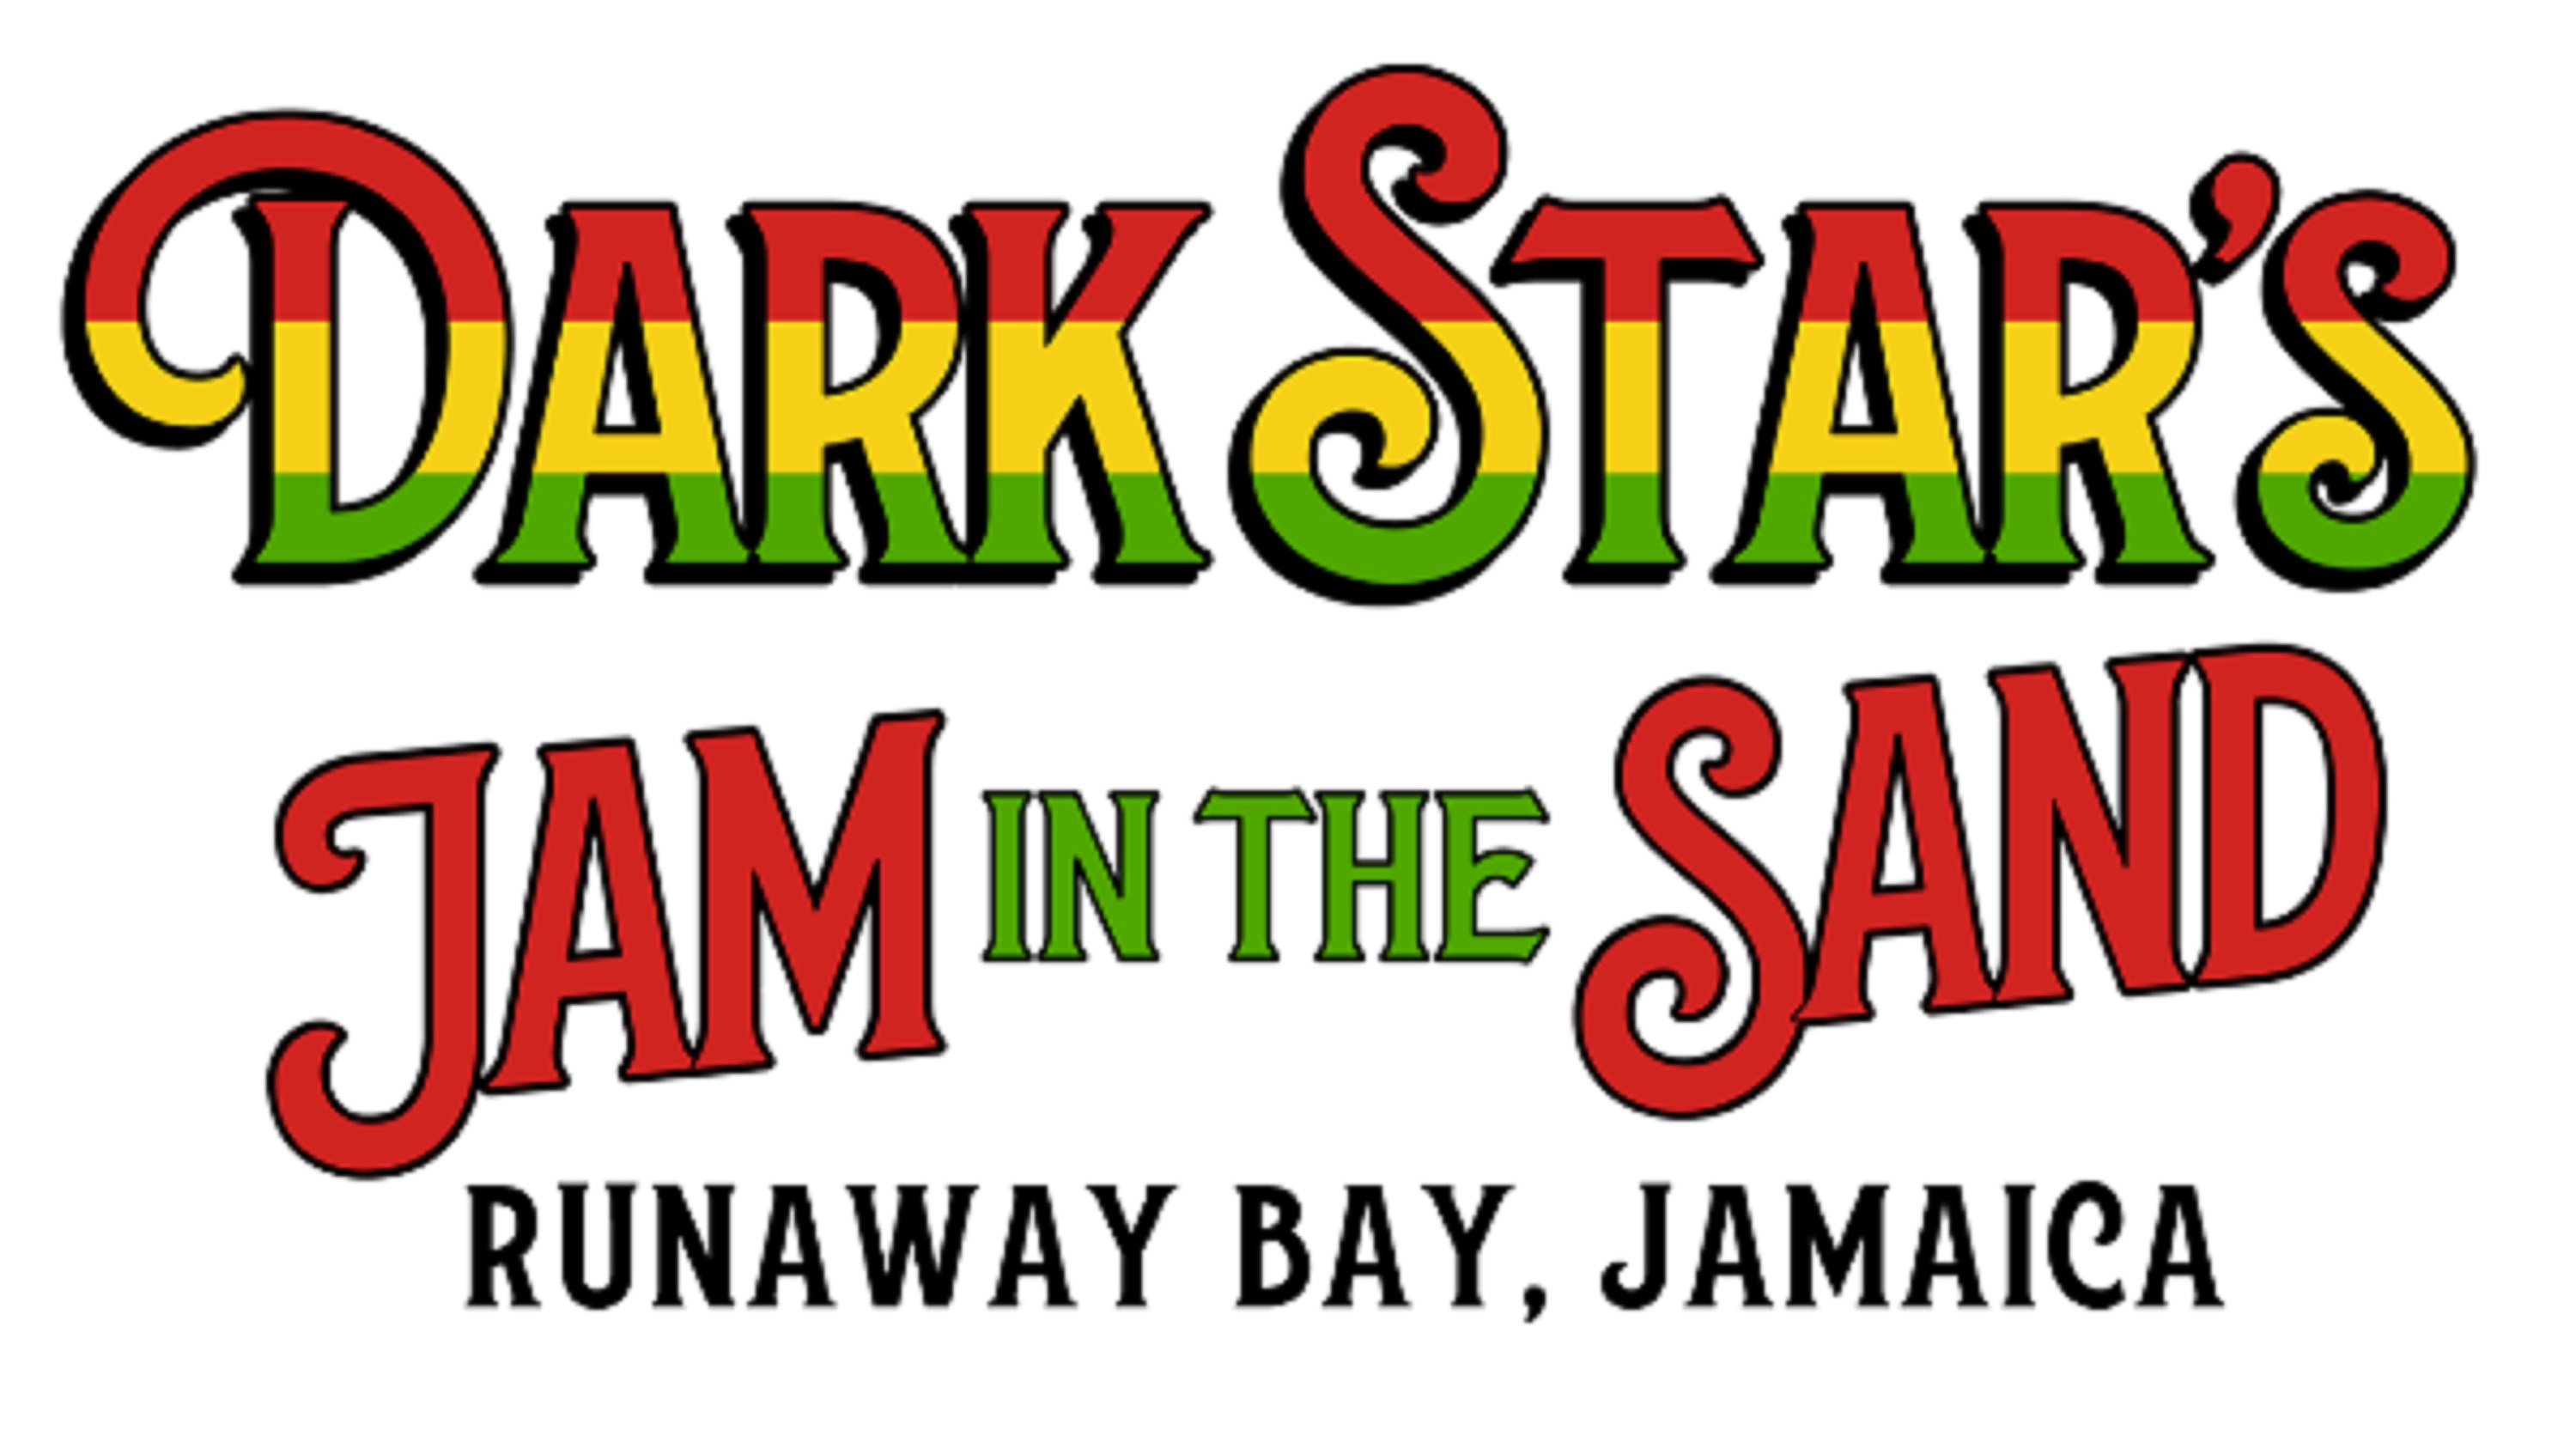 Join Dark Star Orchestra in Jamaica for Jam in the Sand!